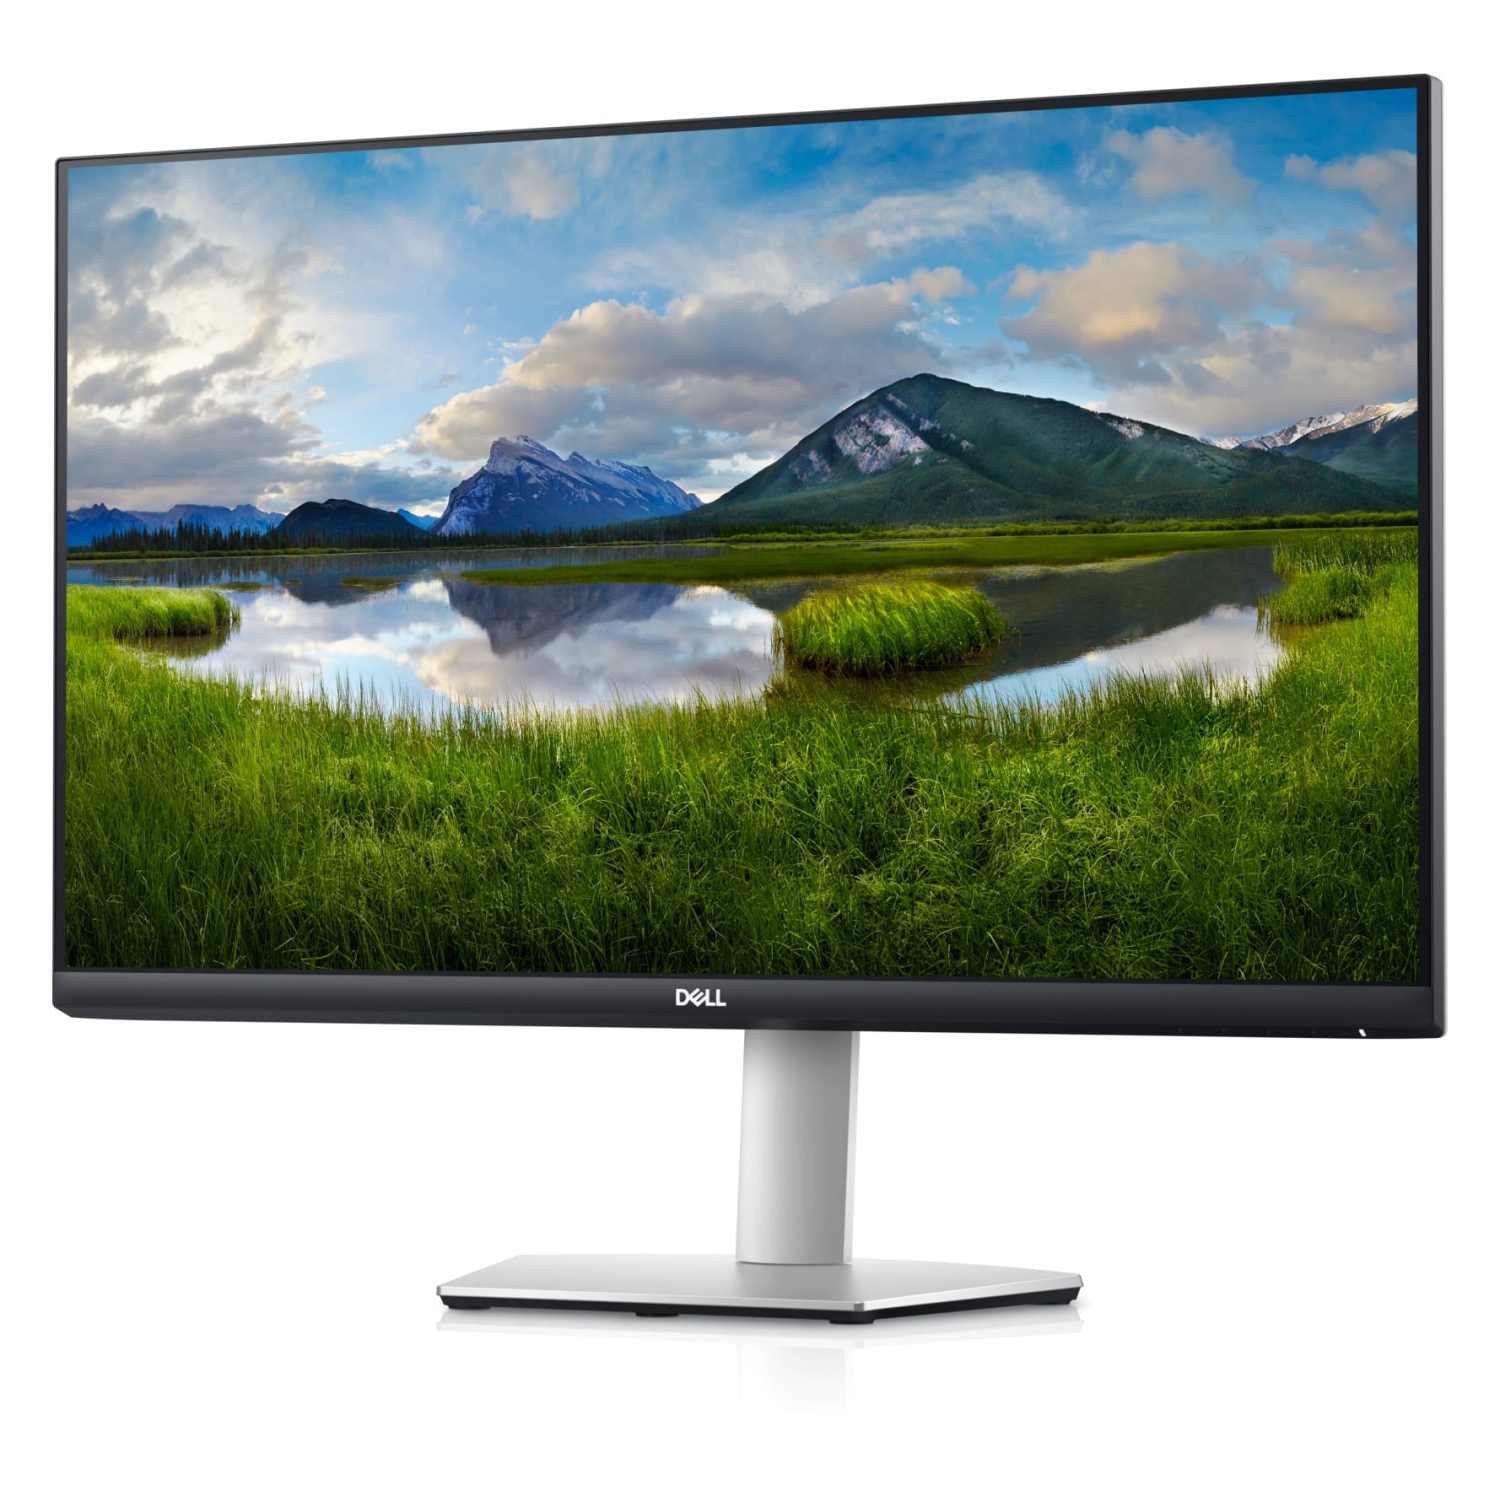 Refurbished (Excellent) - Dell S2721QS Monitor 27" 4K UHD 3840x2160 at 60Hz, AMD FreeSync, DP, HDMI, Certified Refurbished